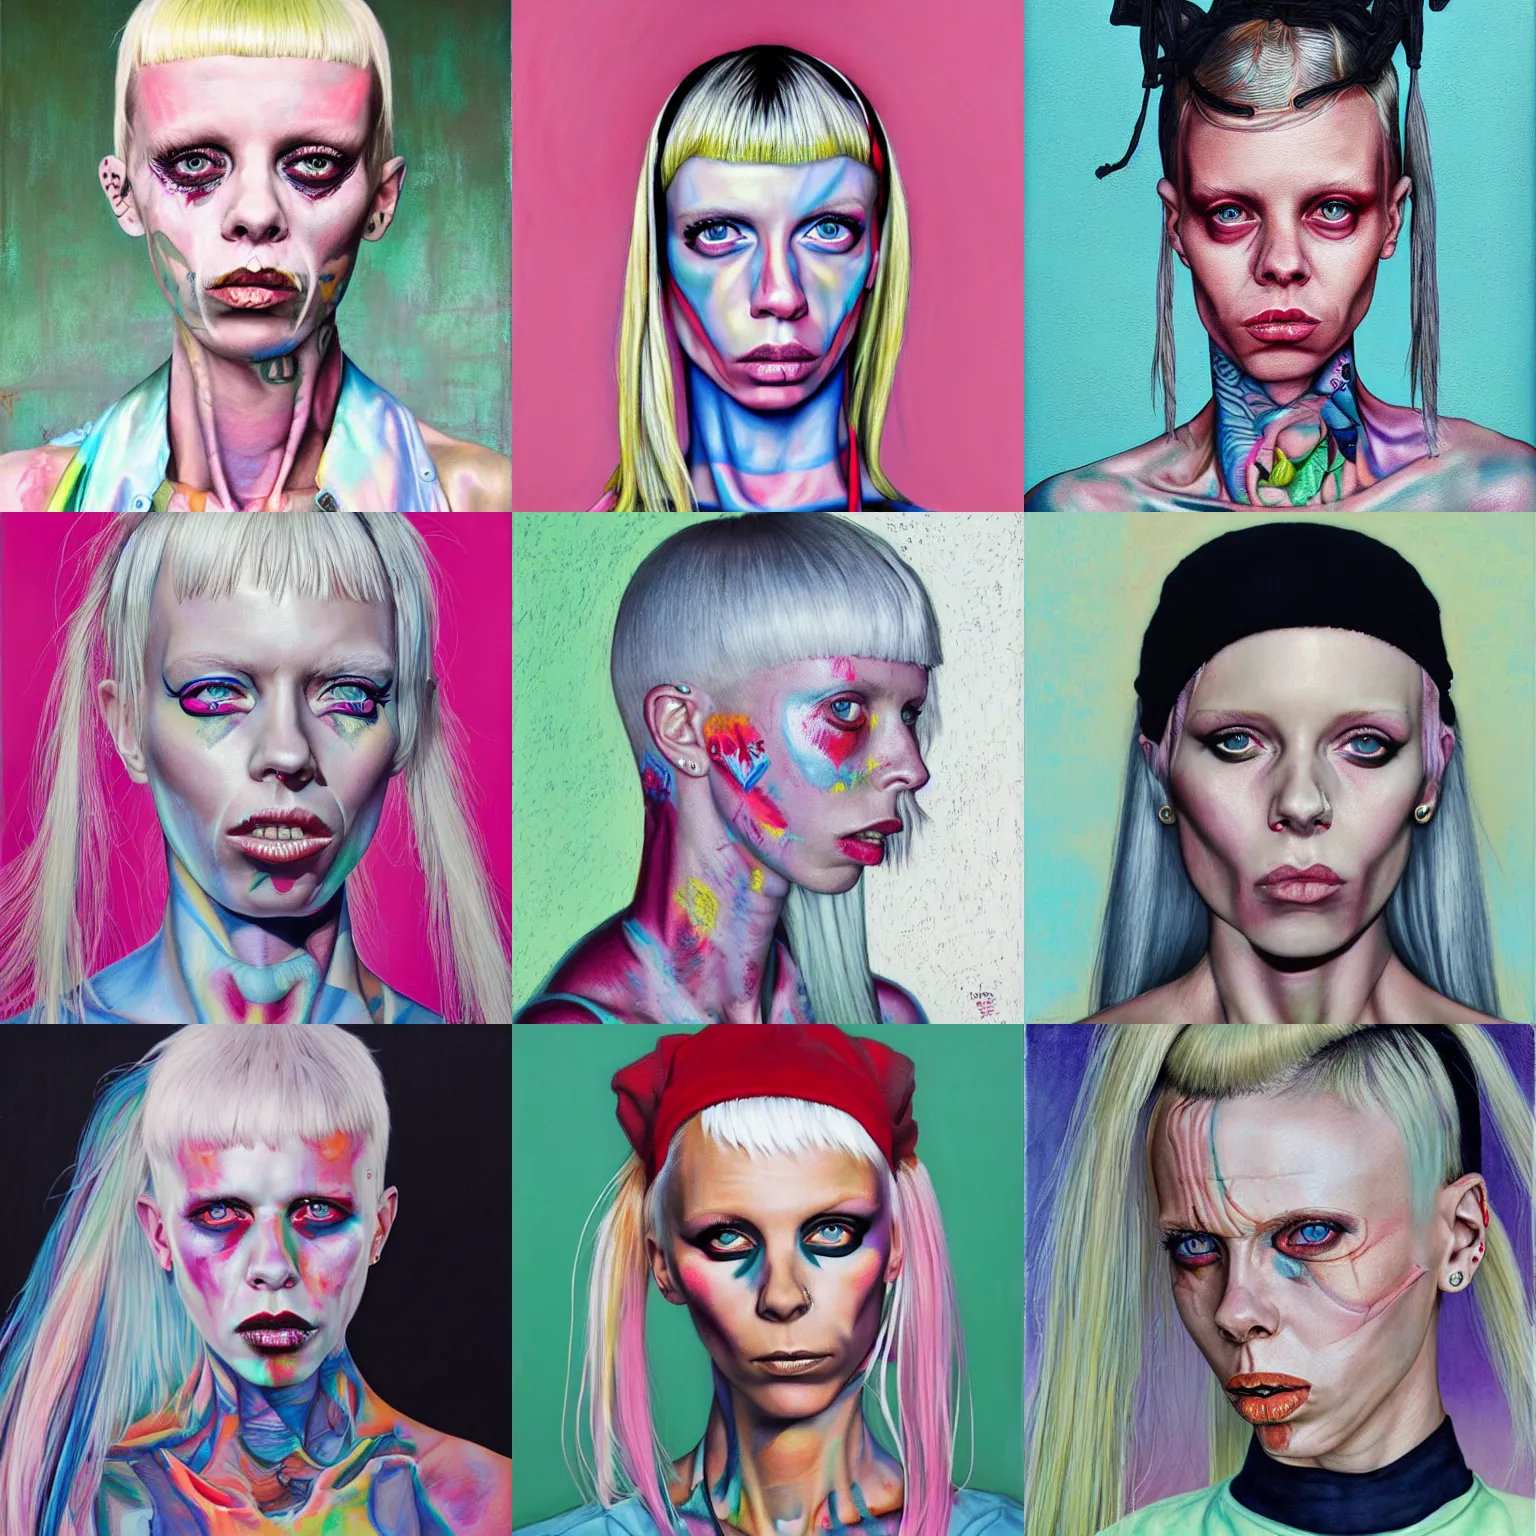 Prompt: yolandi visser from die antwoord standing in a township street, portrait painting by martine johanna, pastel color palette